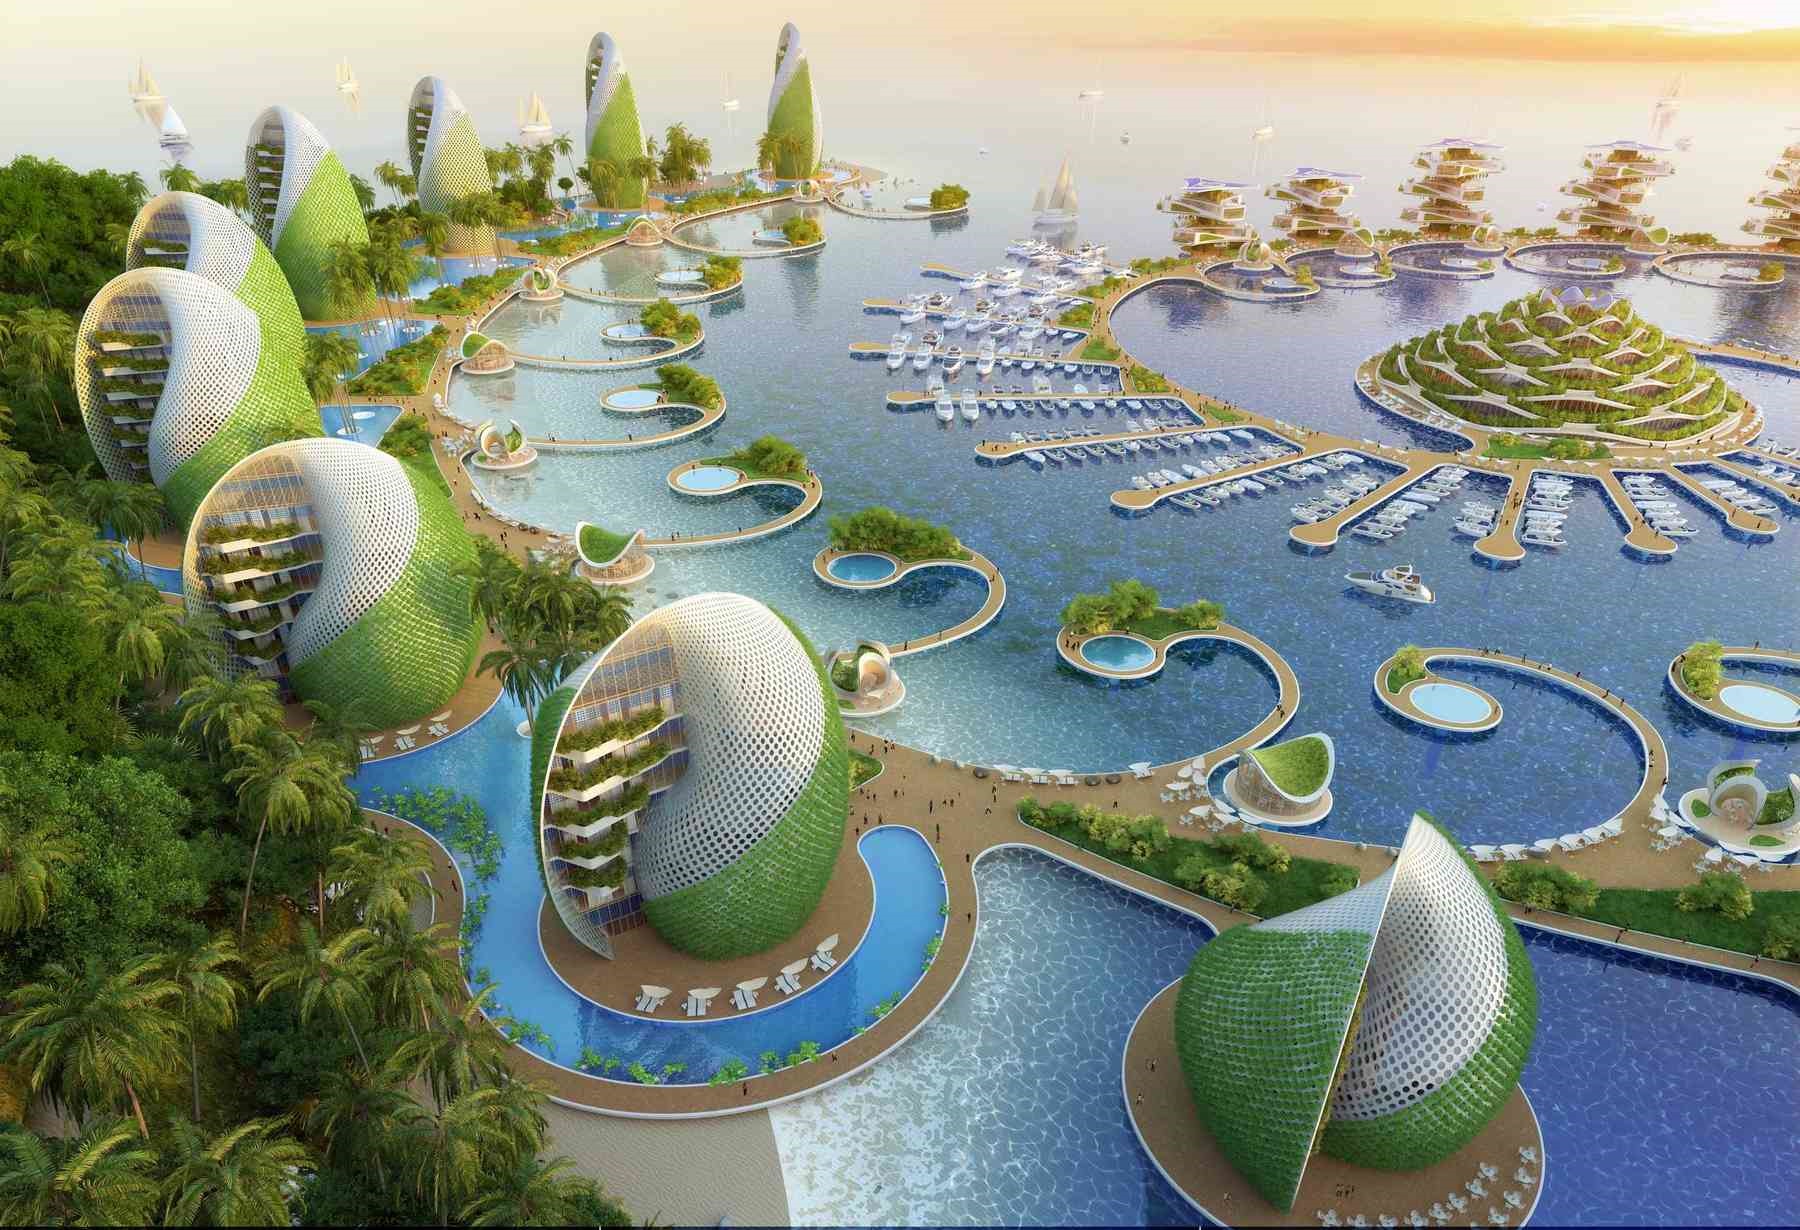 [TRENDING] This Design of Eco-Resort in PH Could Be What Hotels Will Look Like in the Future